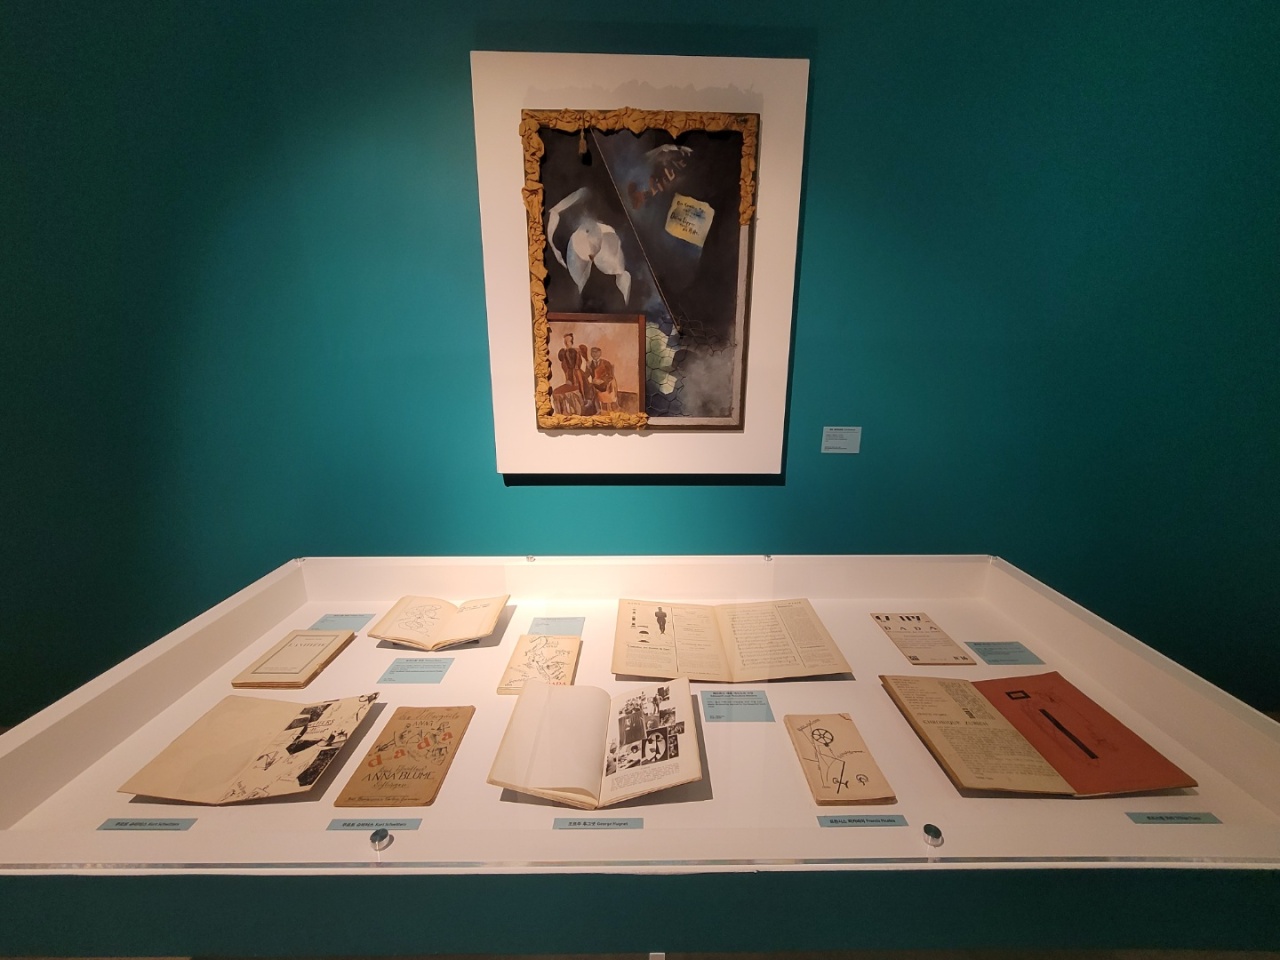 Archivals on surrealism are on display as part of the collection from the Museum Boijmans Van Beuningen at Hangaram Arts Center Museum in Seoul. (Park Yuna/The Korea Herald)